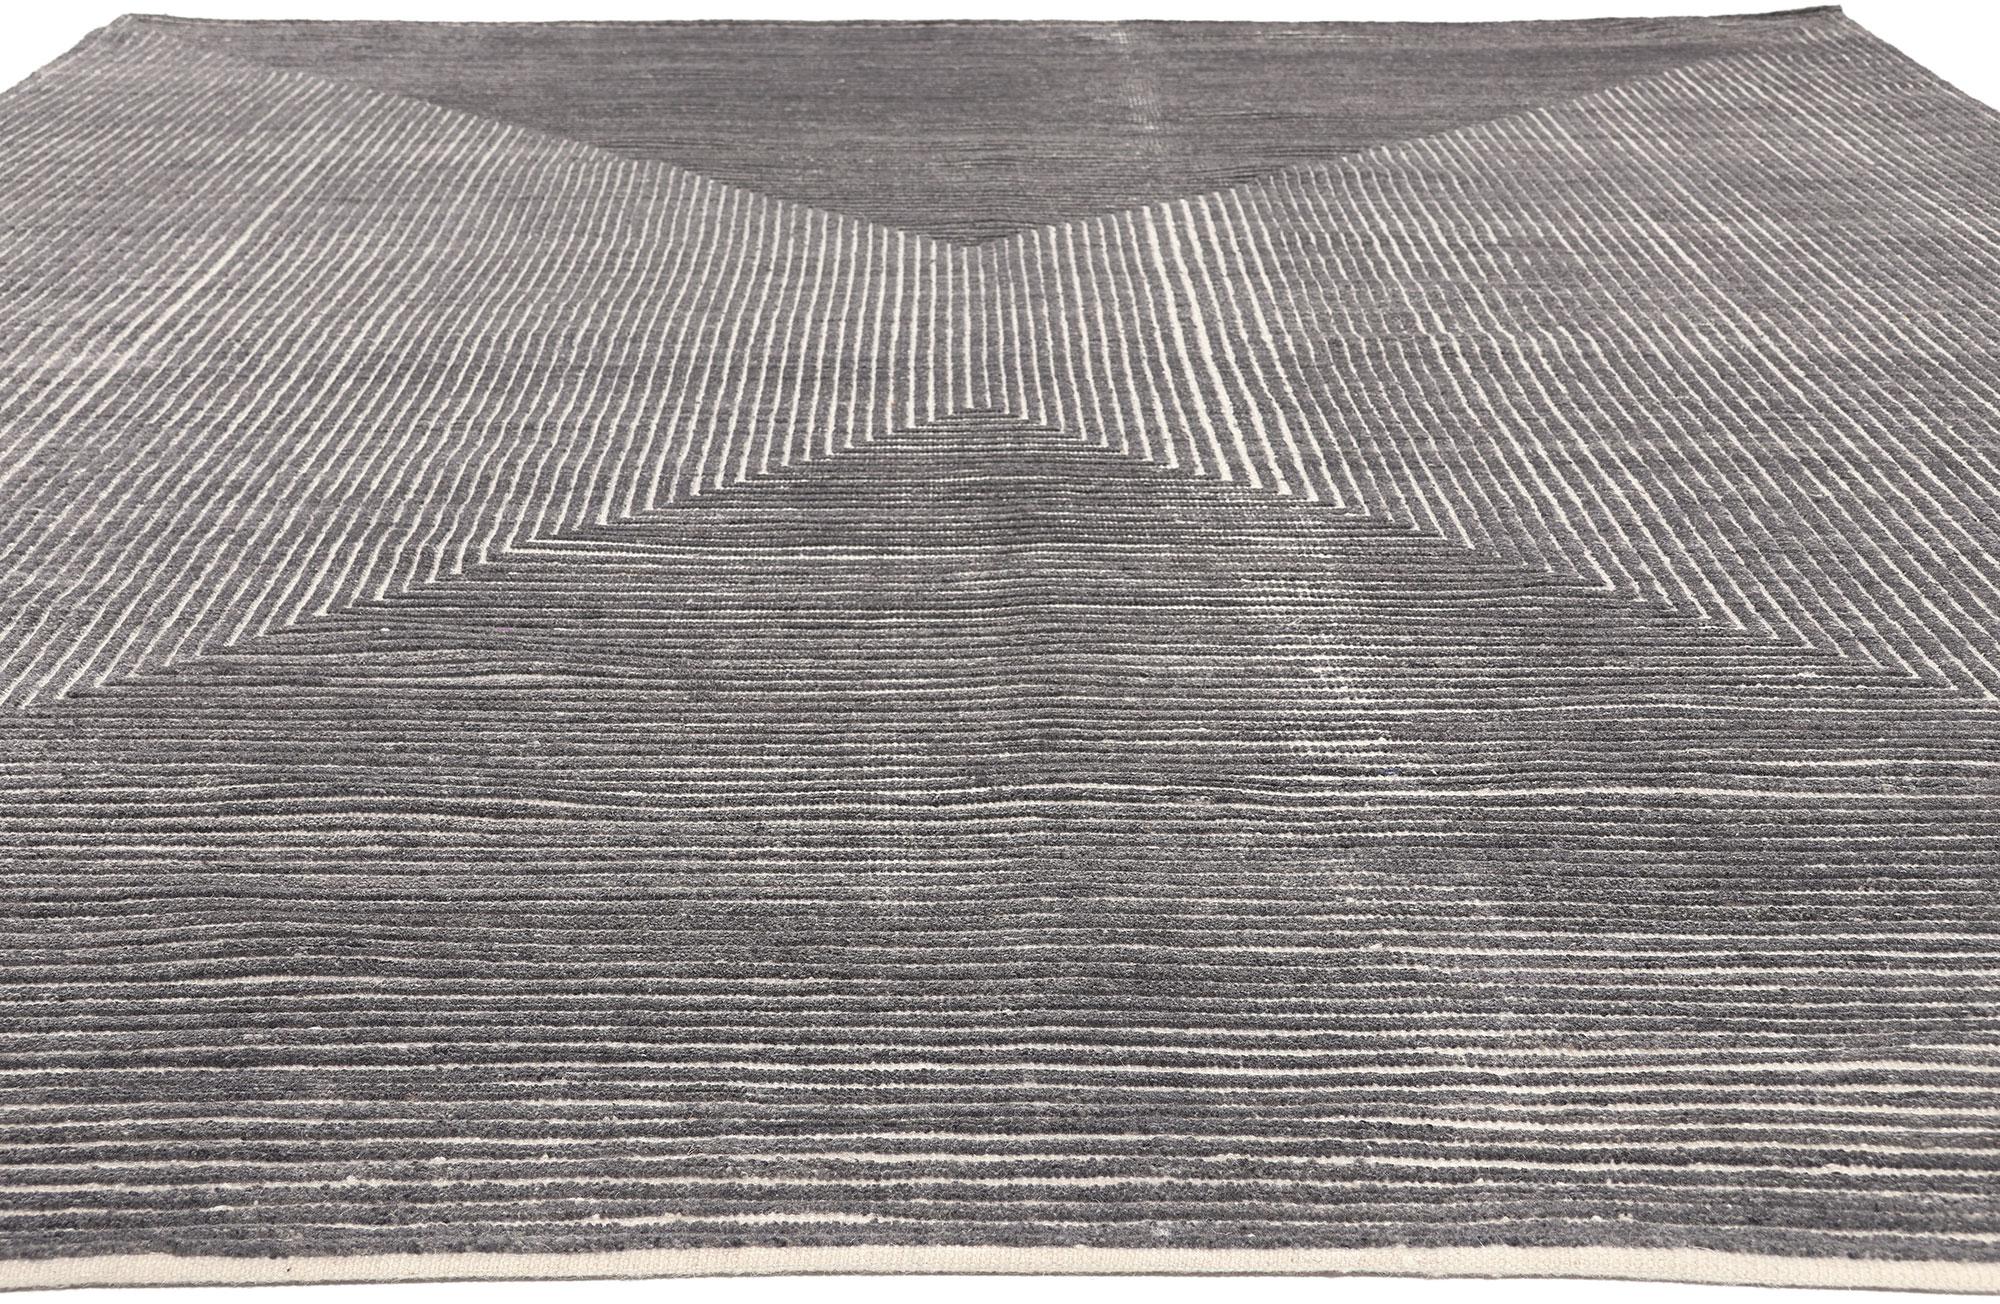 Indian Modern Gray Opt Art High-Low Rug, Sublime Simplicity Meets Tantalizing Texture For Sale